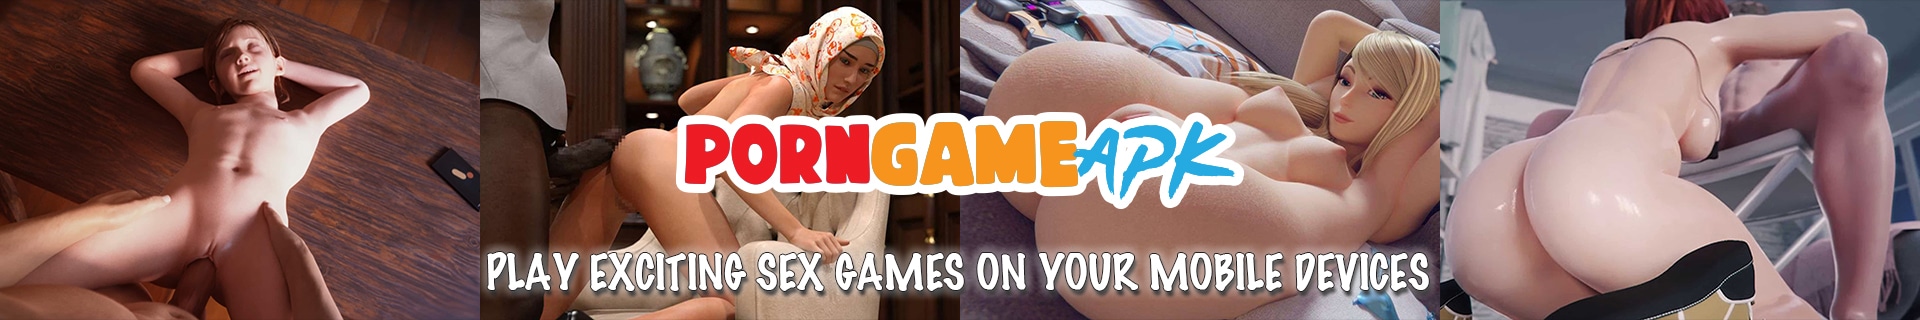 Porn Game Apk â€“ Free Android Porn Games